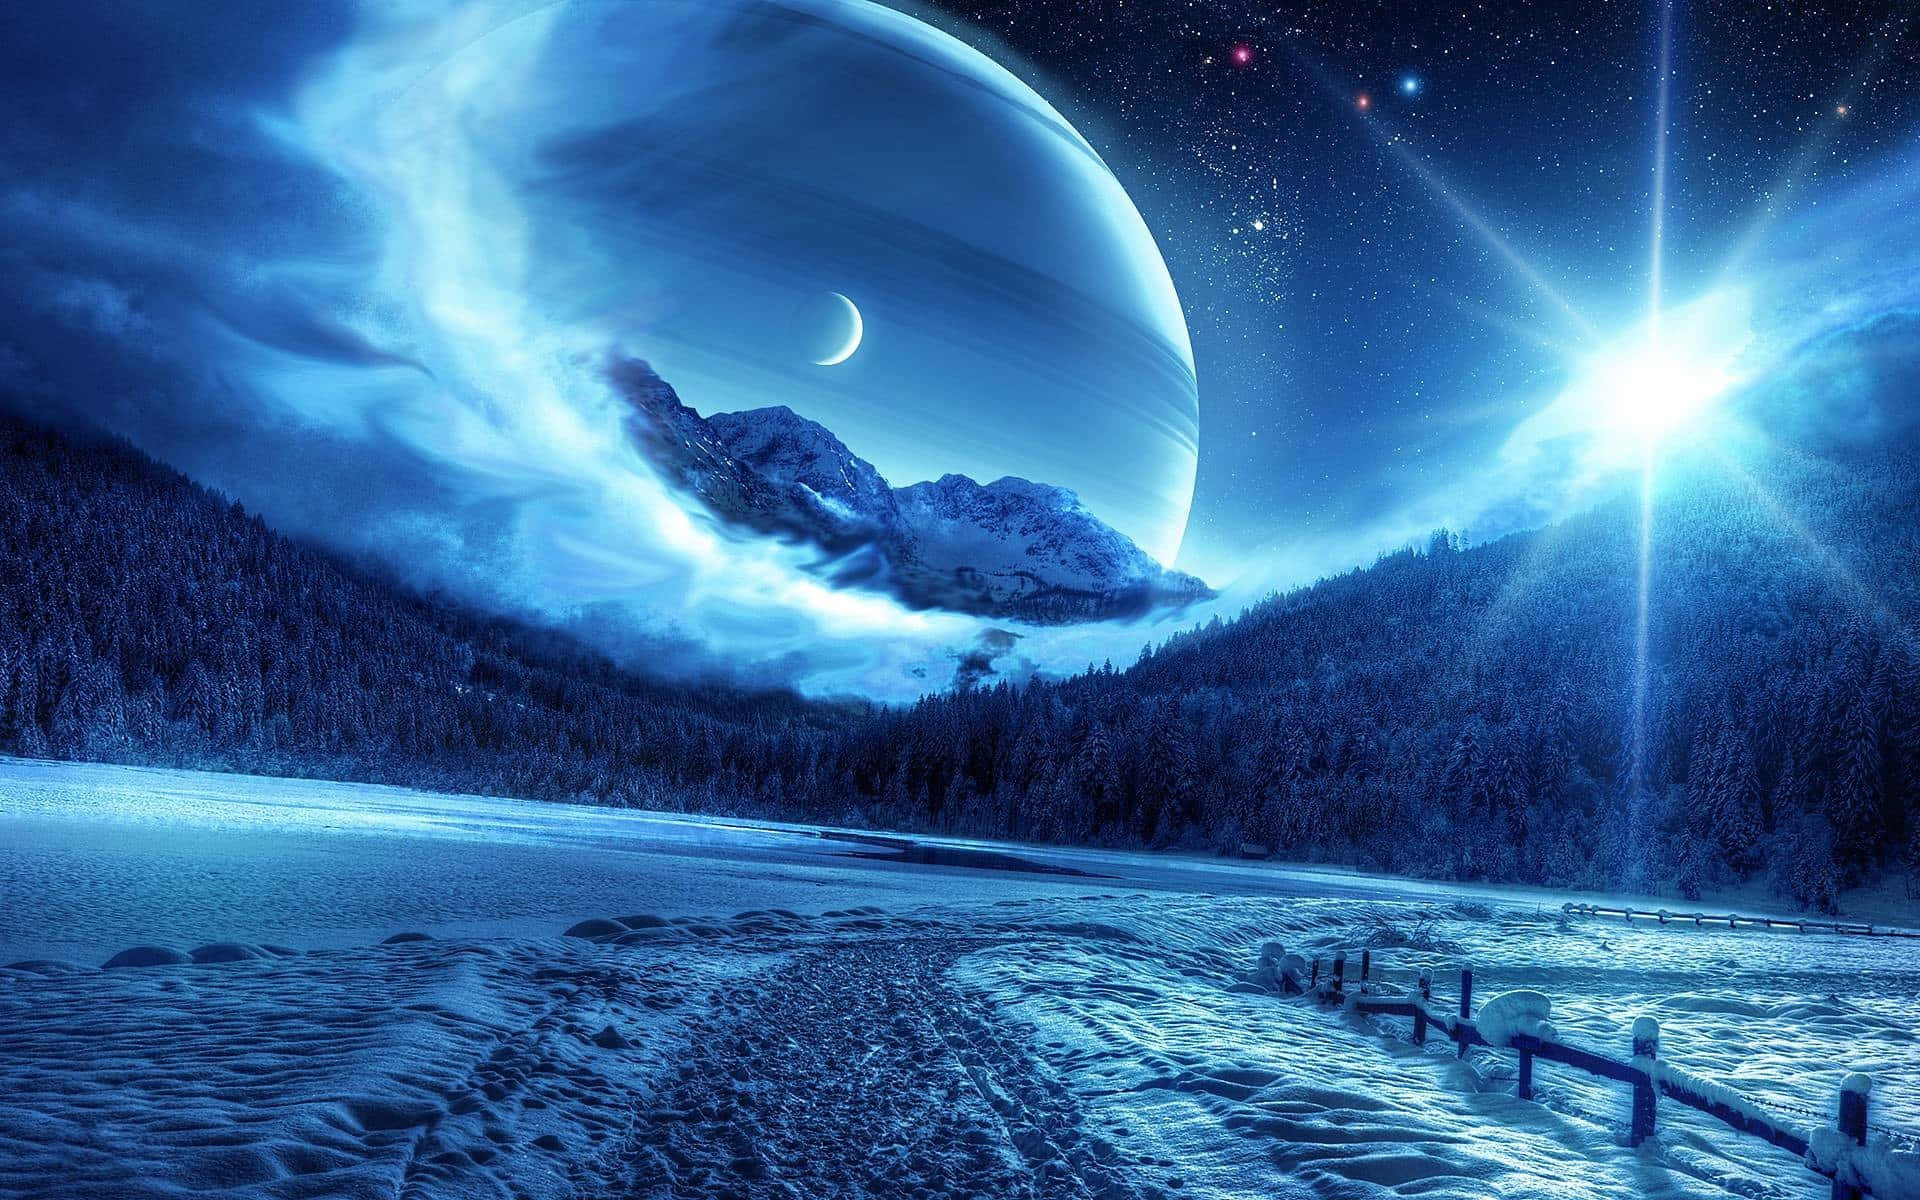 Surreal_ Night_ Sky_ Over_ Snowscape.jpg Wallpaper